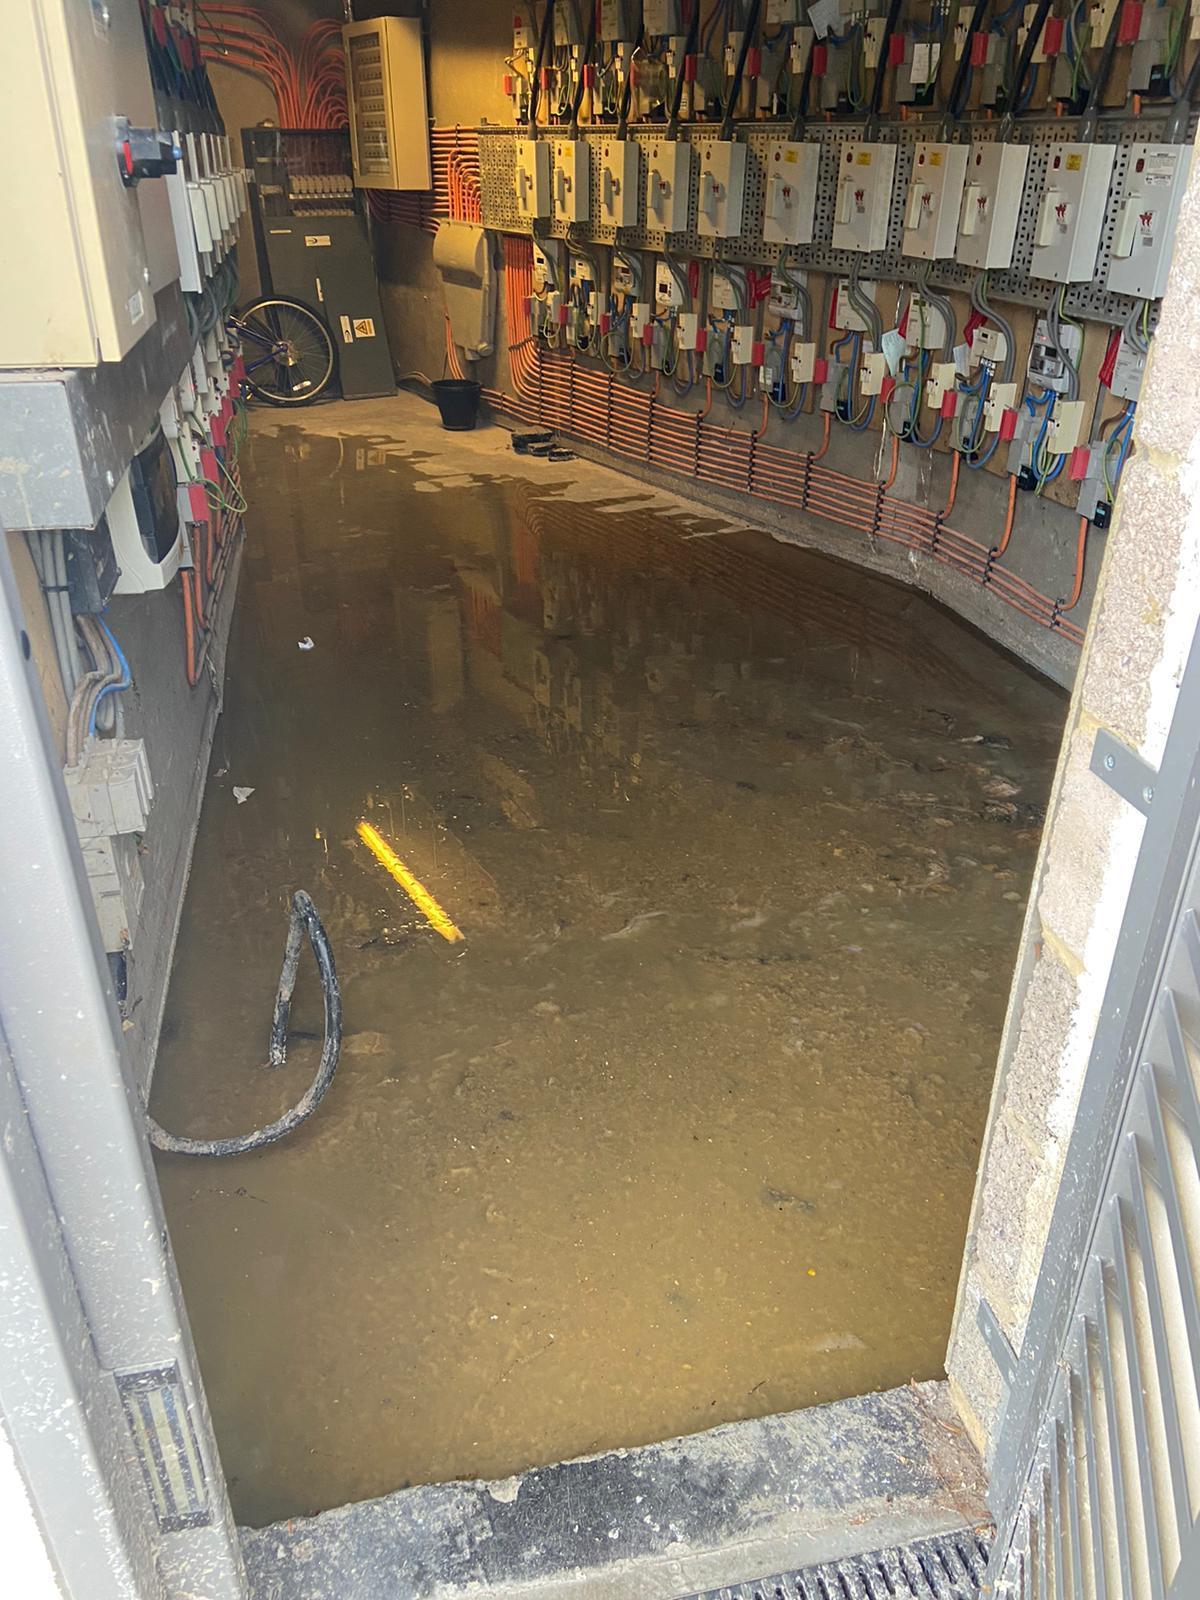 Flooding inside a room housing electrical equipment (submitted by Adnan Abo)